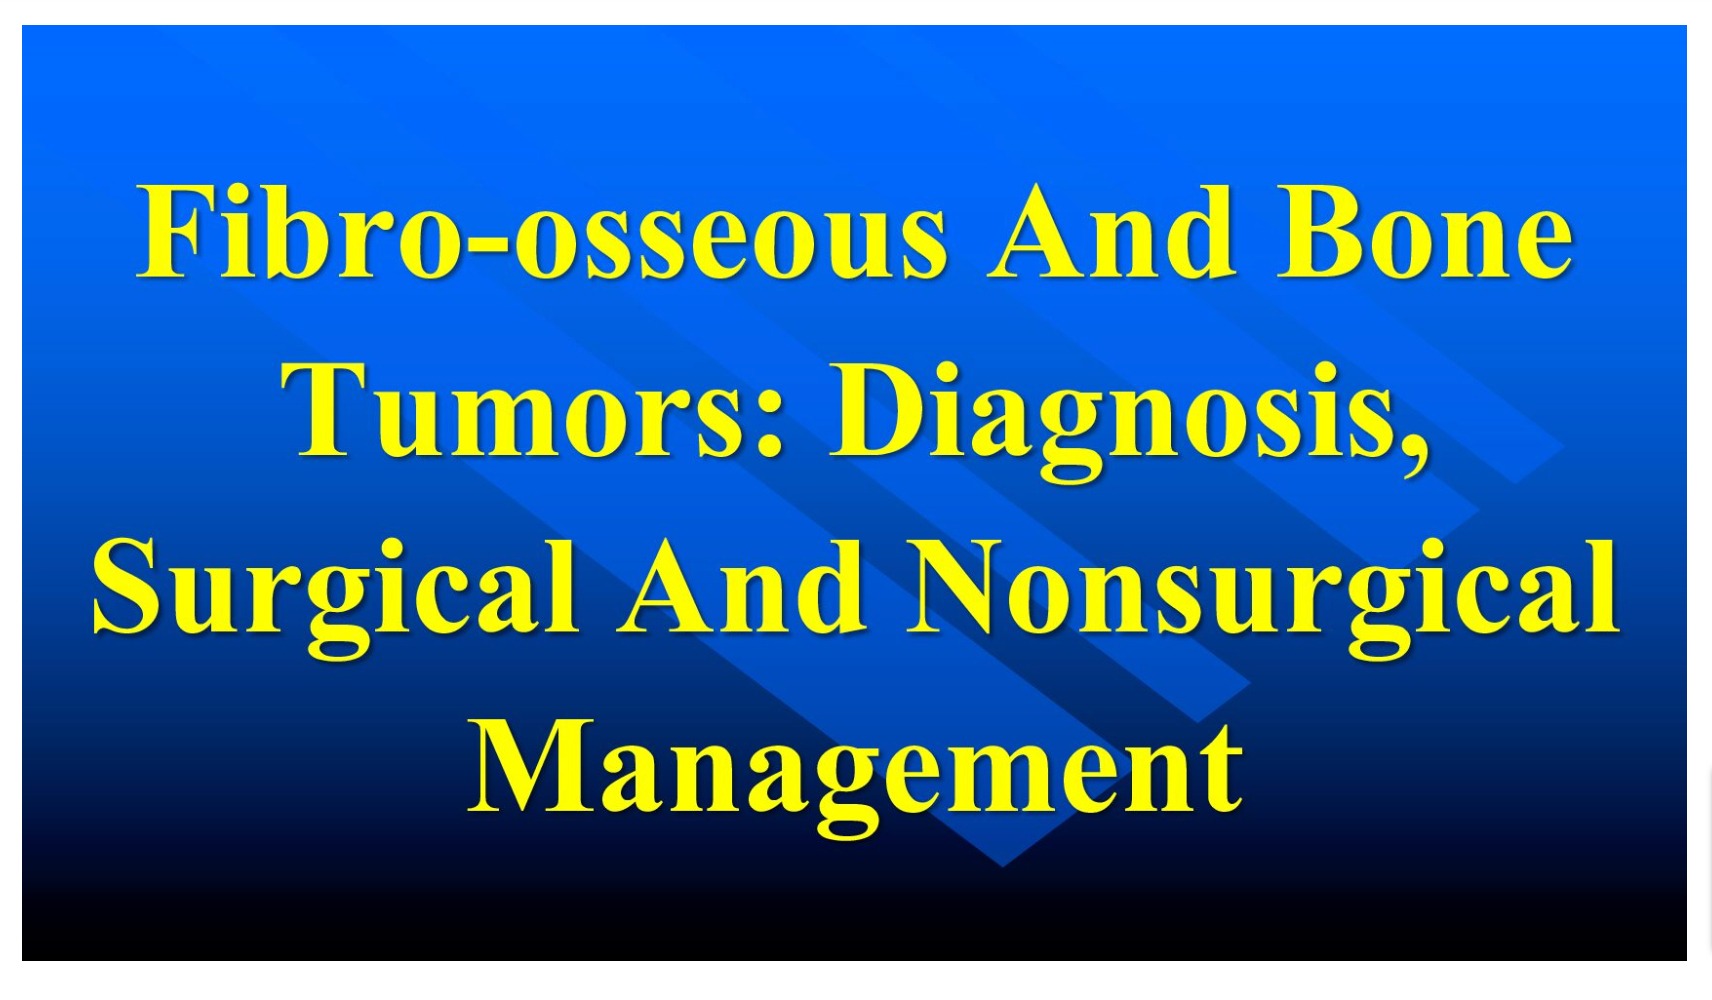 Fibro-osseous and Bone Tumors: Diagnosis, Surgical and Nonsurgical Management